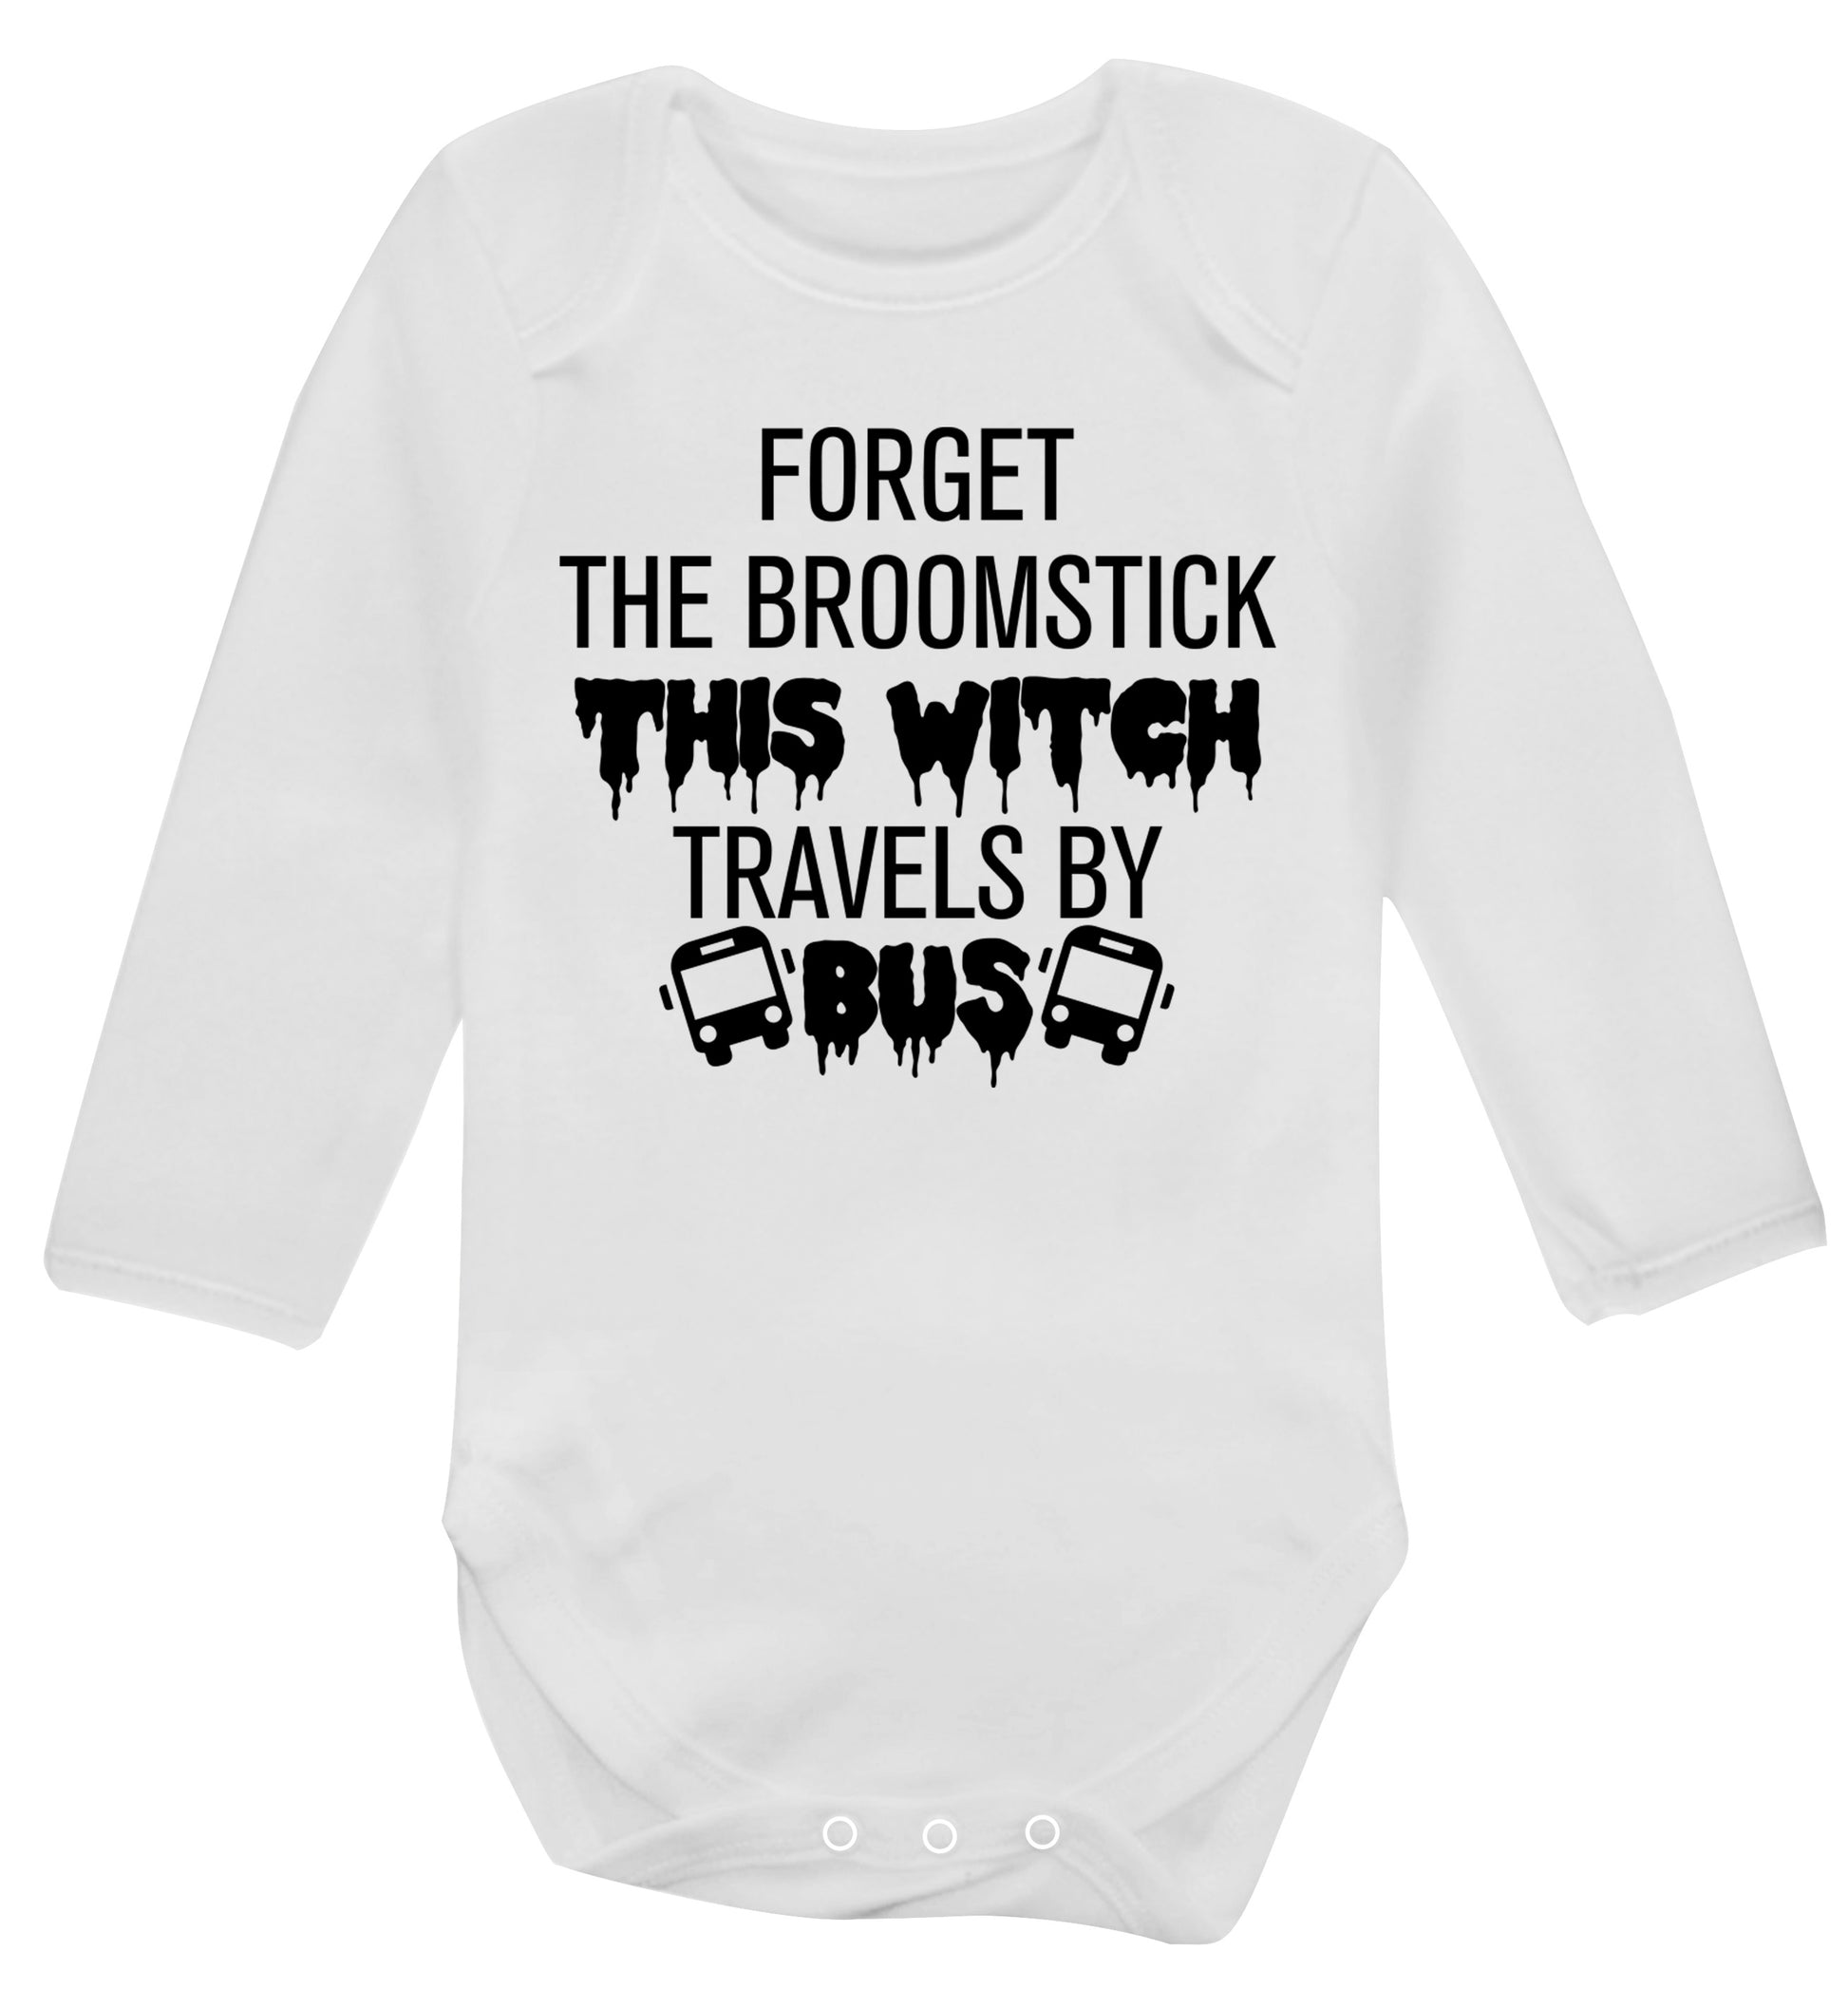 Forget the broomstick this witch travels by bus Baby Vest long sleeved white 6-12 months